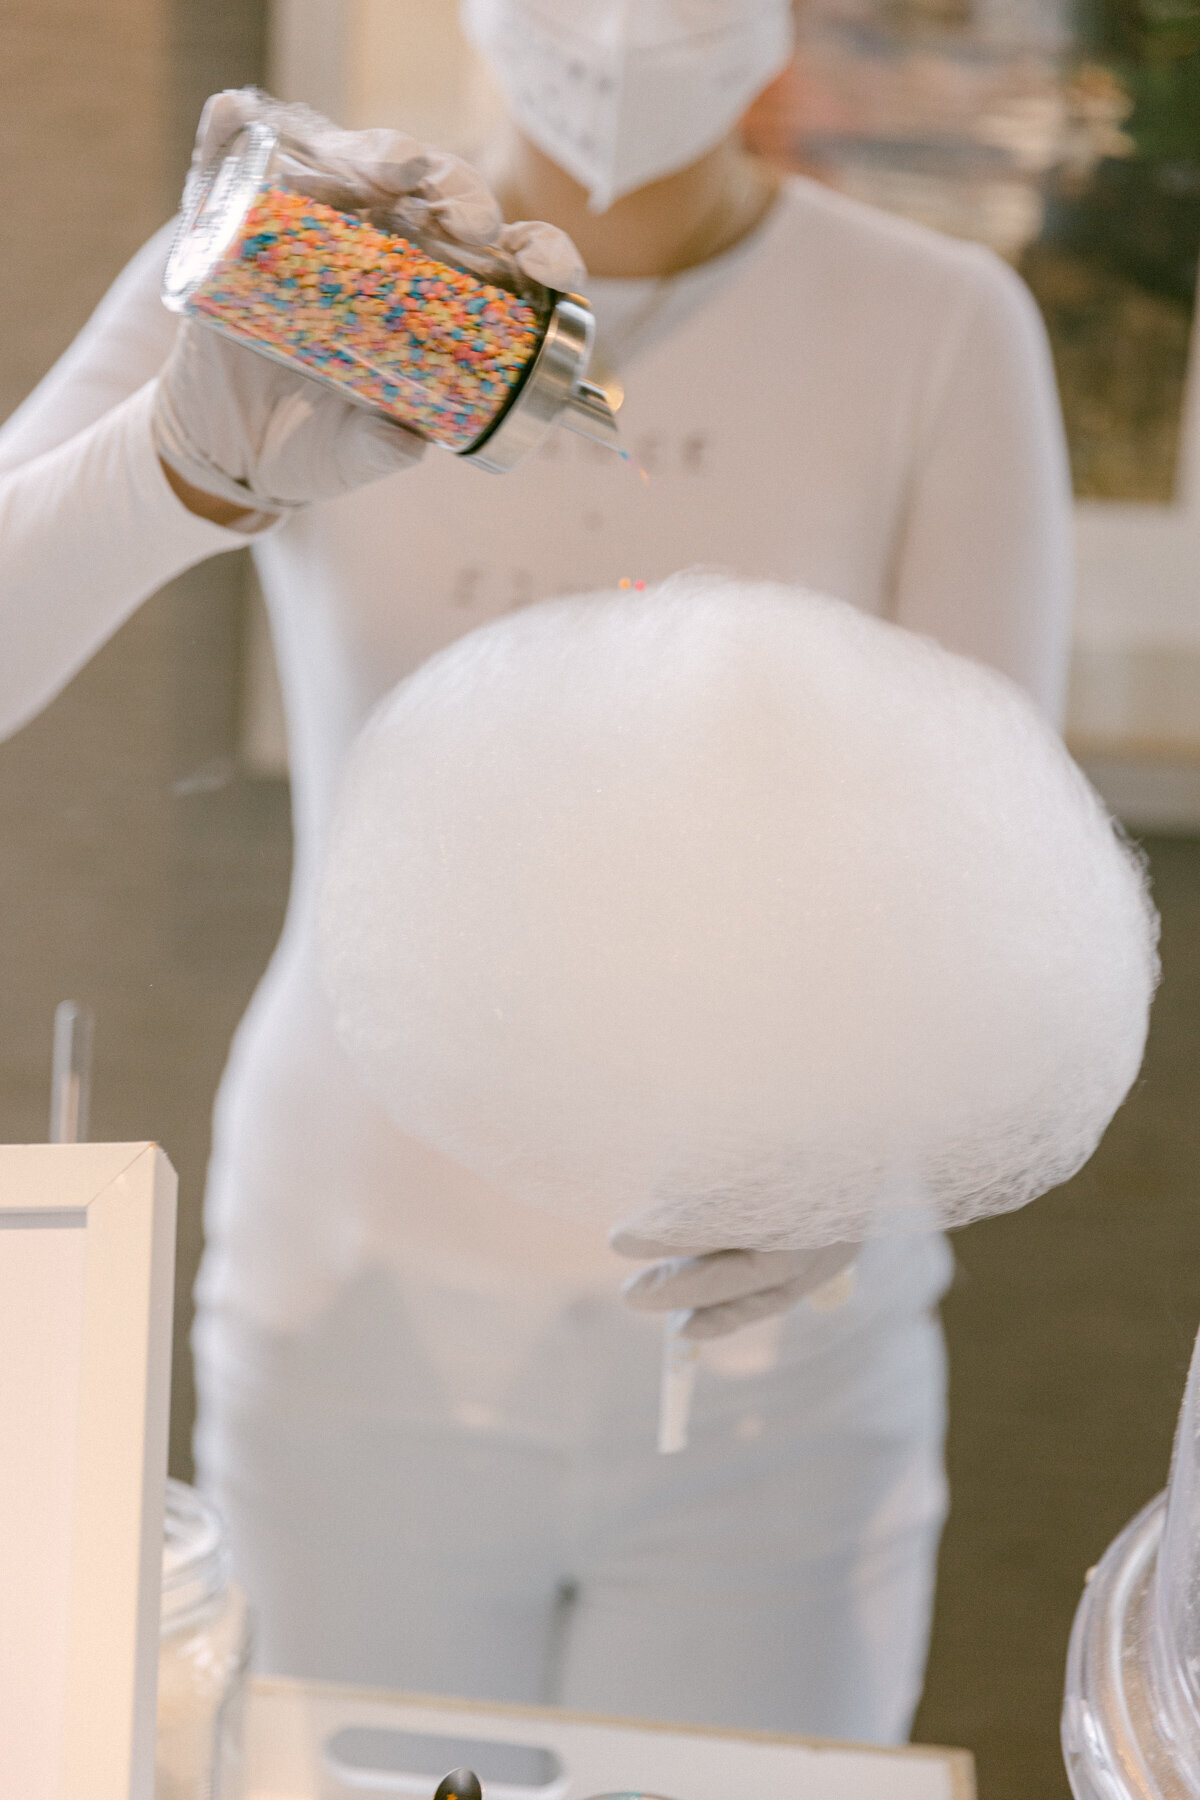 Person Serving Cotton Candy